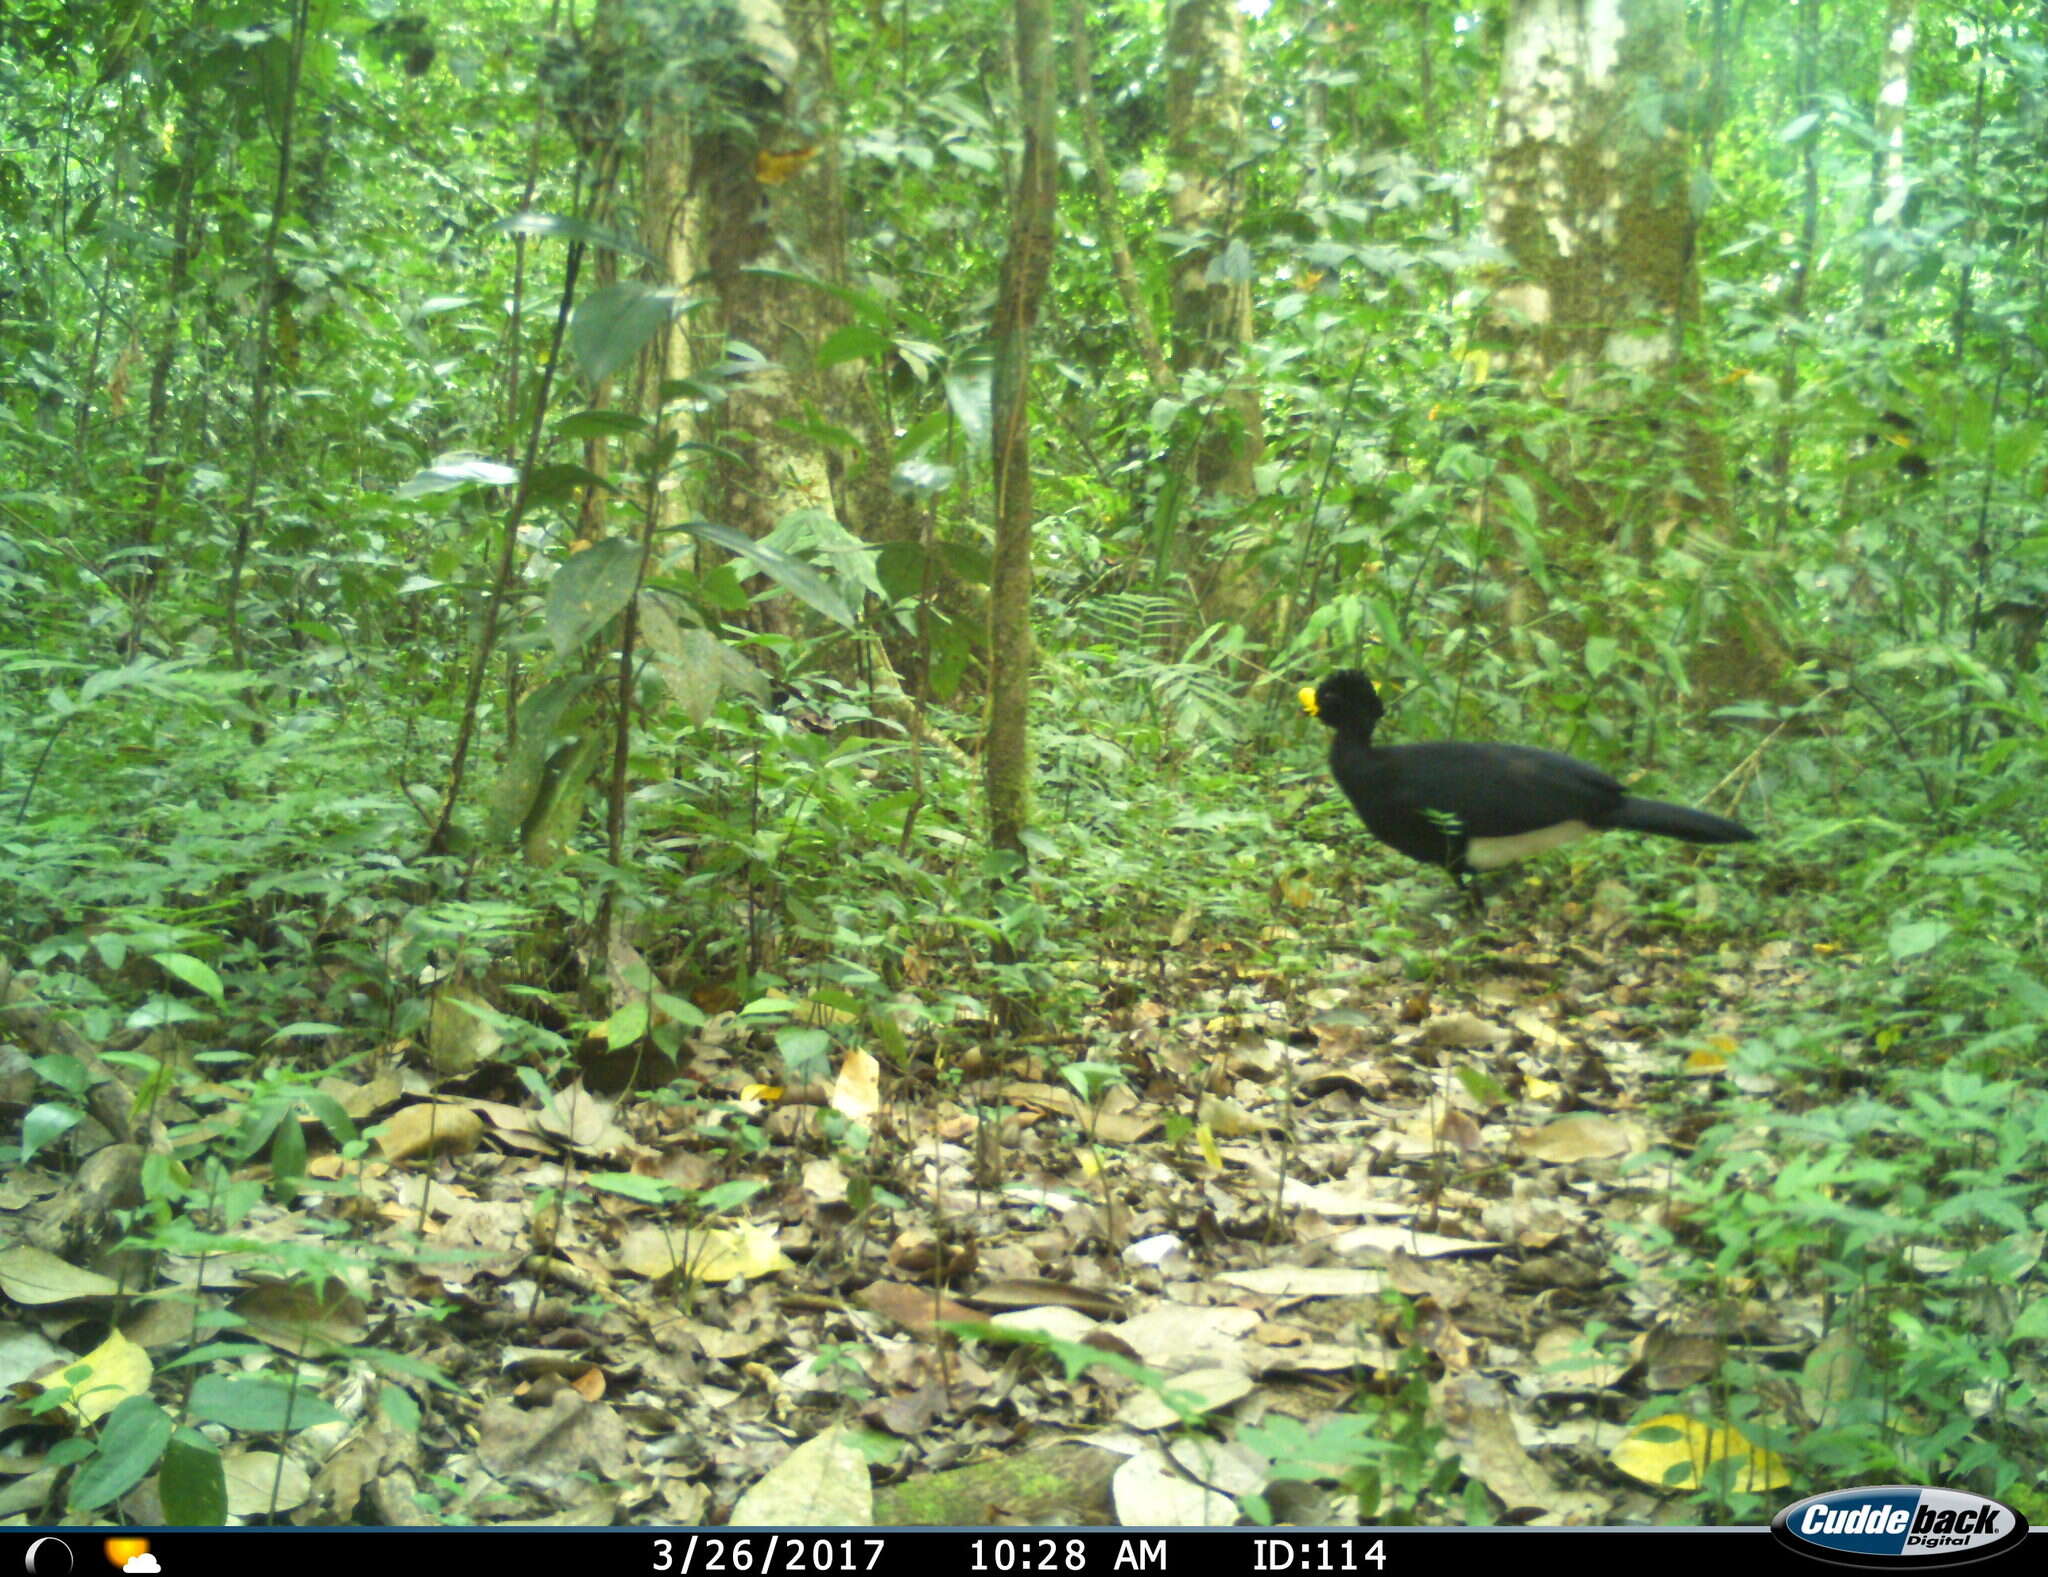 Image of Great Curassow